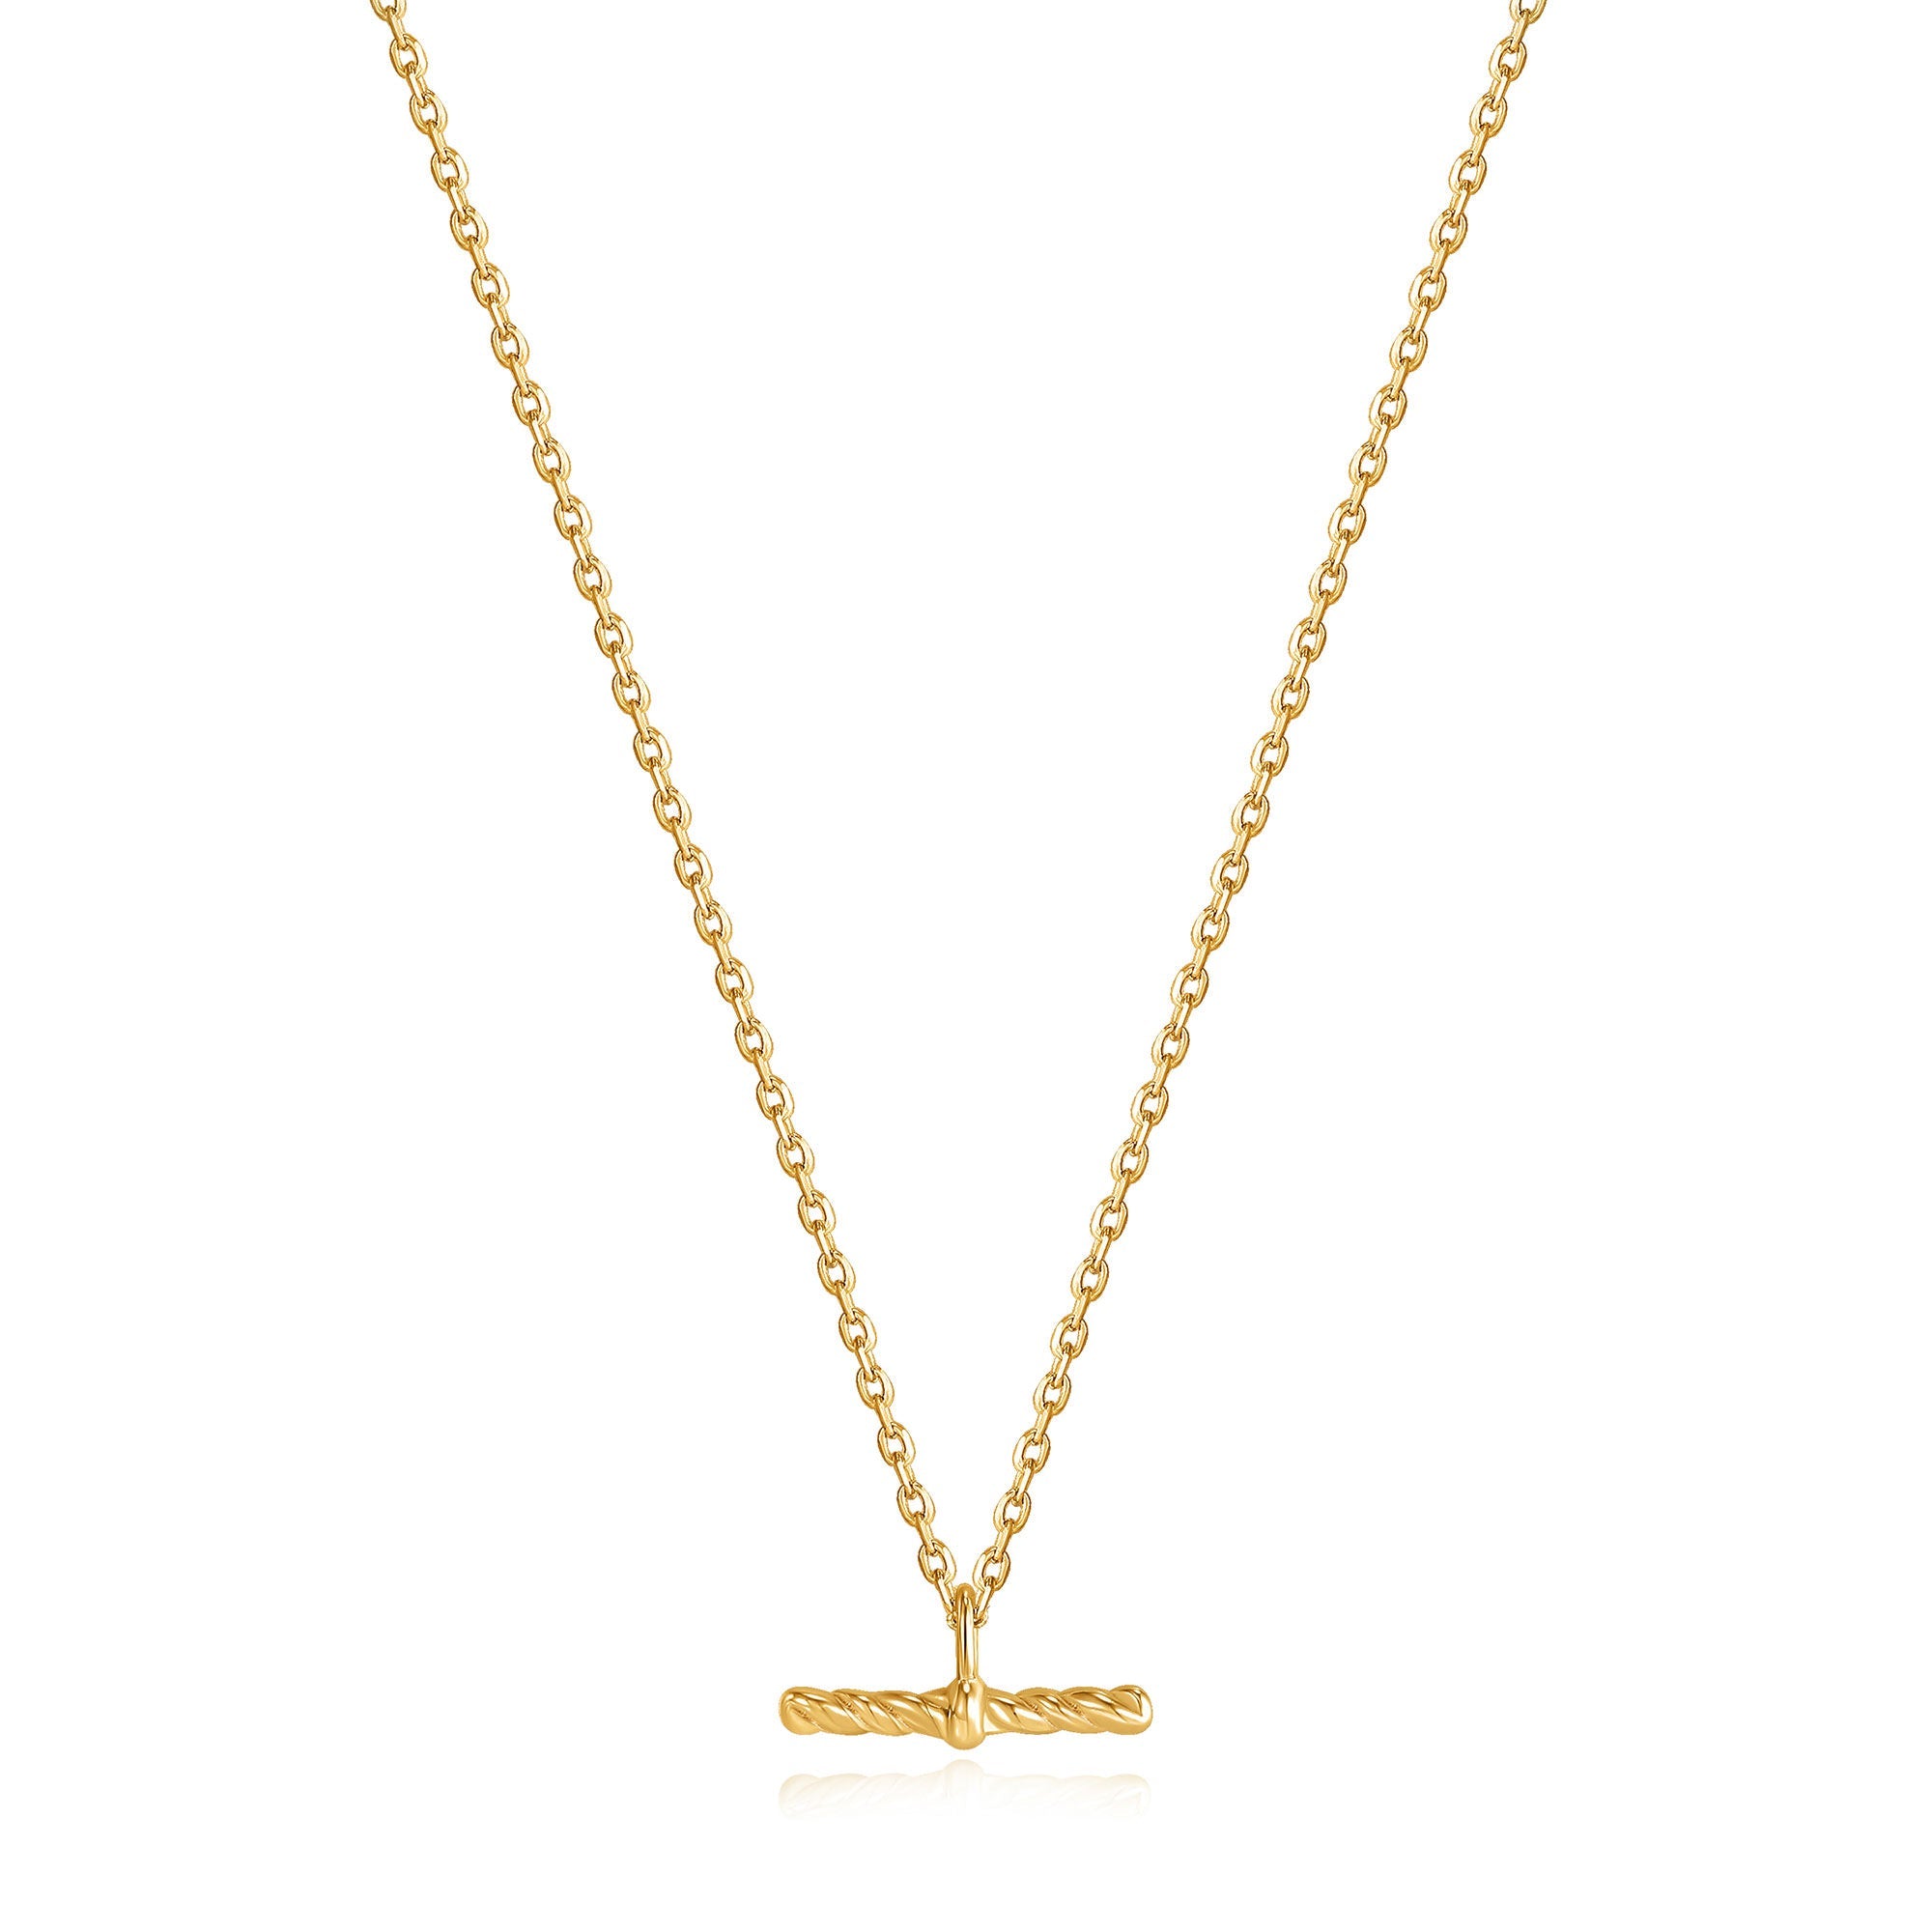 14K Yellow Gold Heart-Shaped T-Bar Necklace | Shane Co.